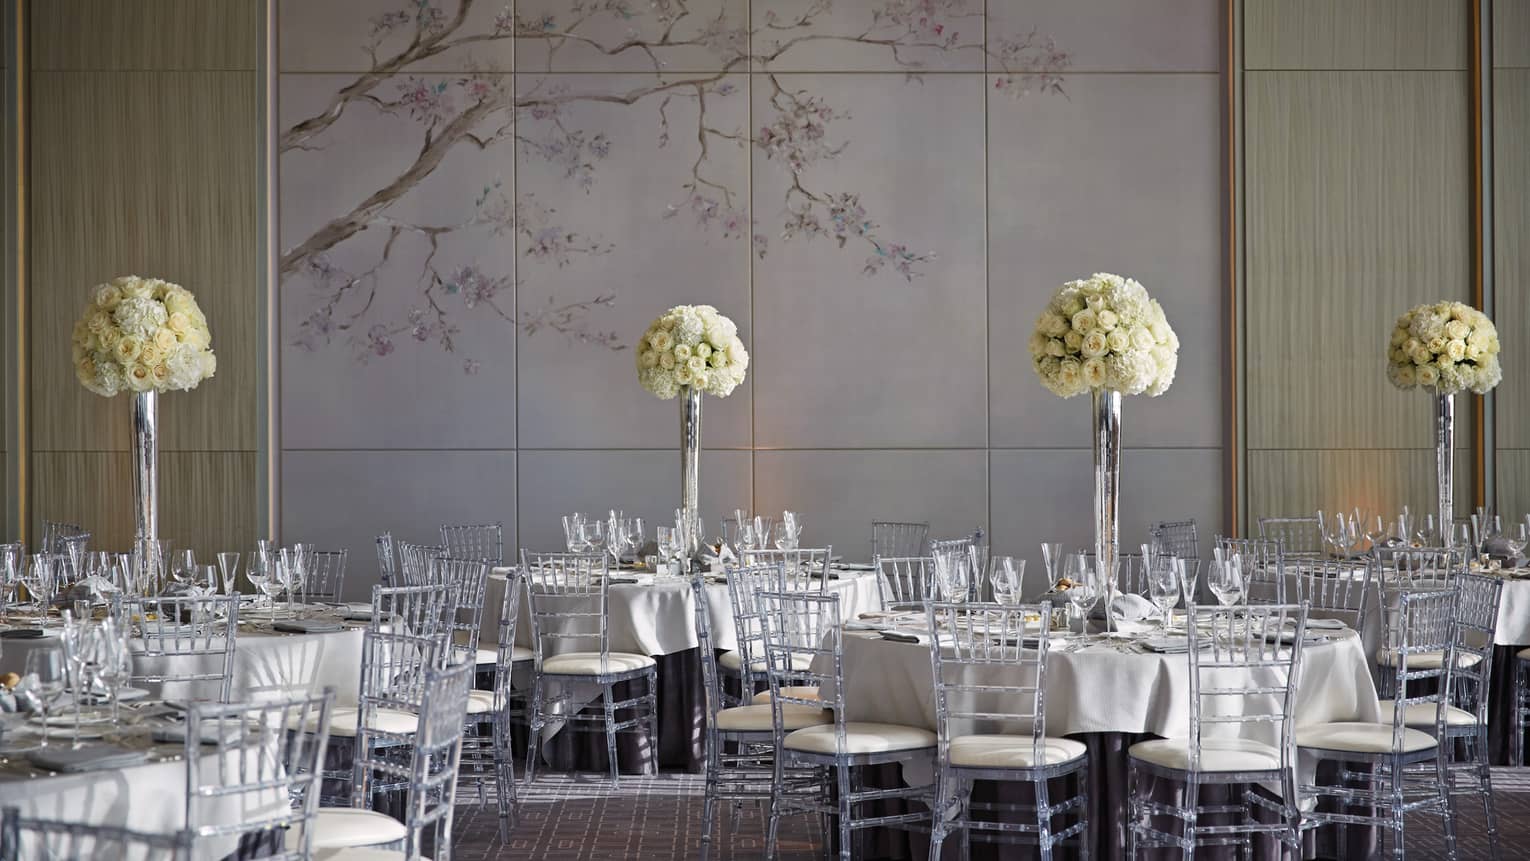 Vinci ballroom banquet dining tables with tall white flowers, accent wall